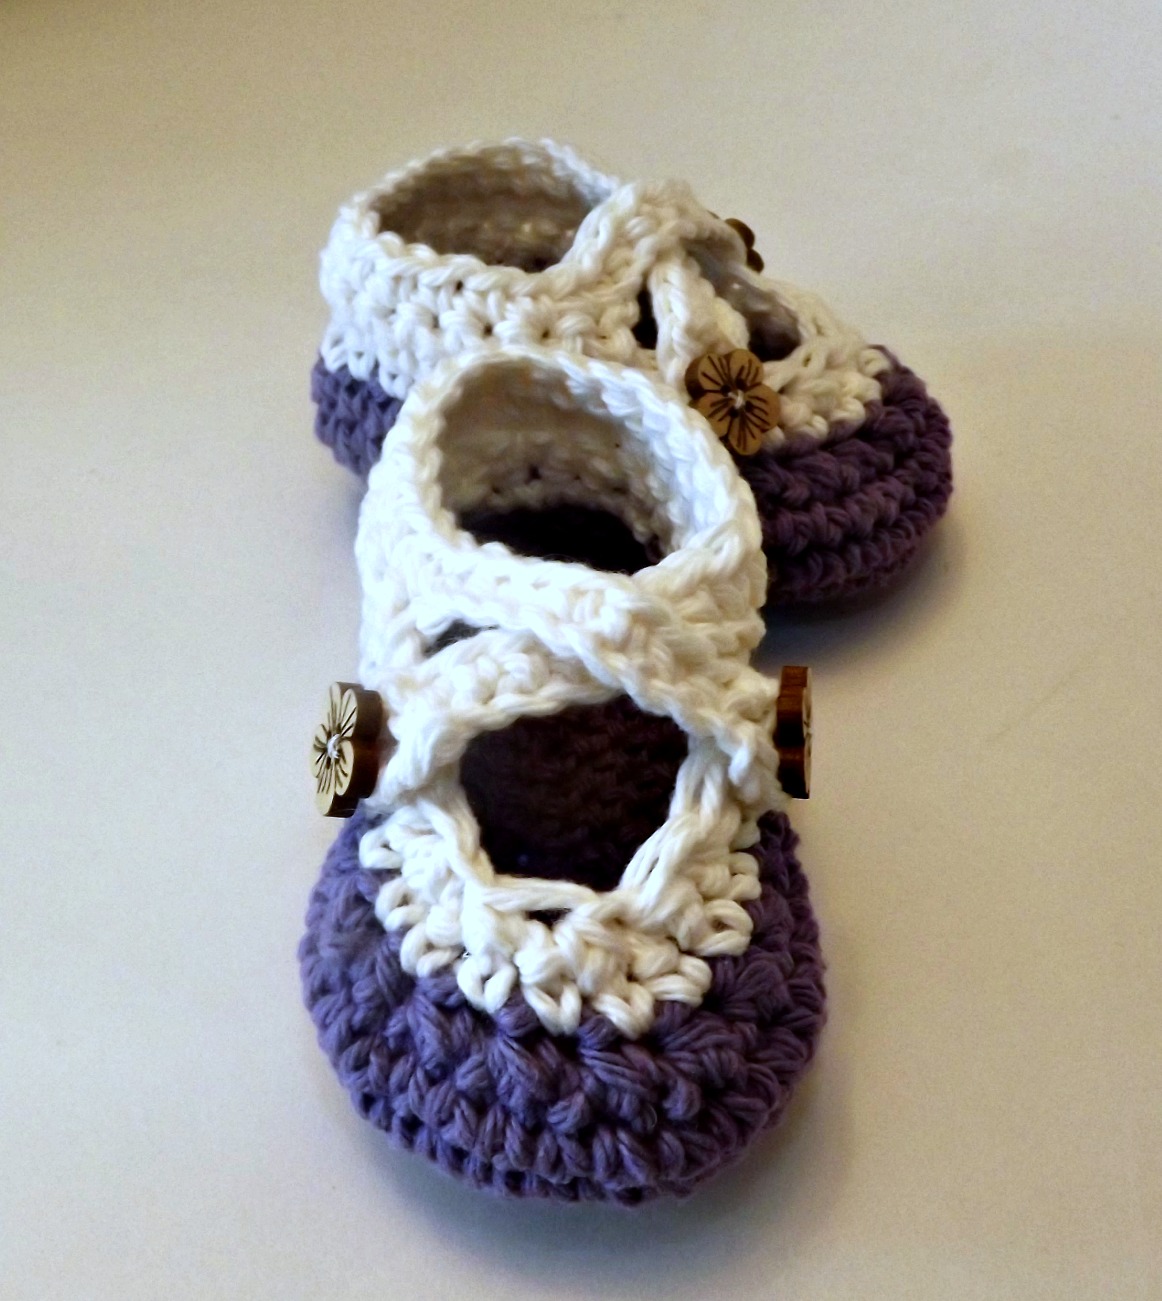 Crochet Two Strap Baby Booties, Lavender Purple And Ivory With Wood Flower Buttons